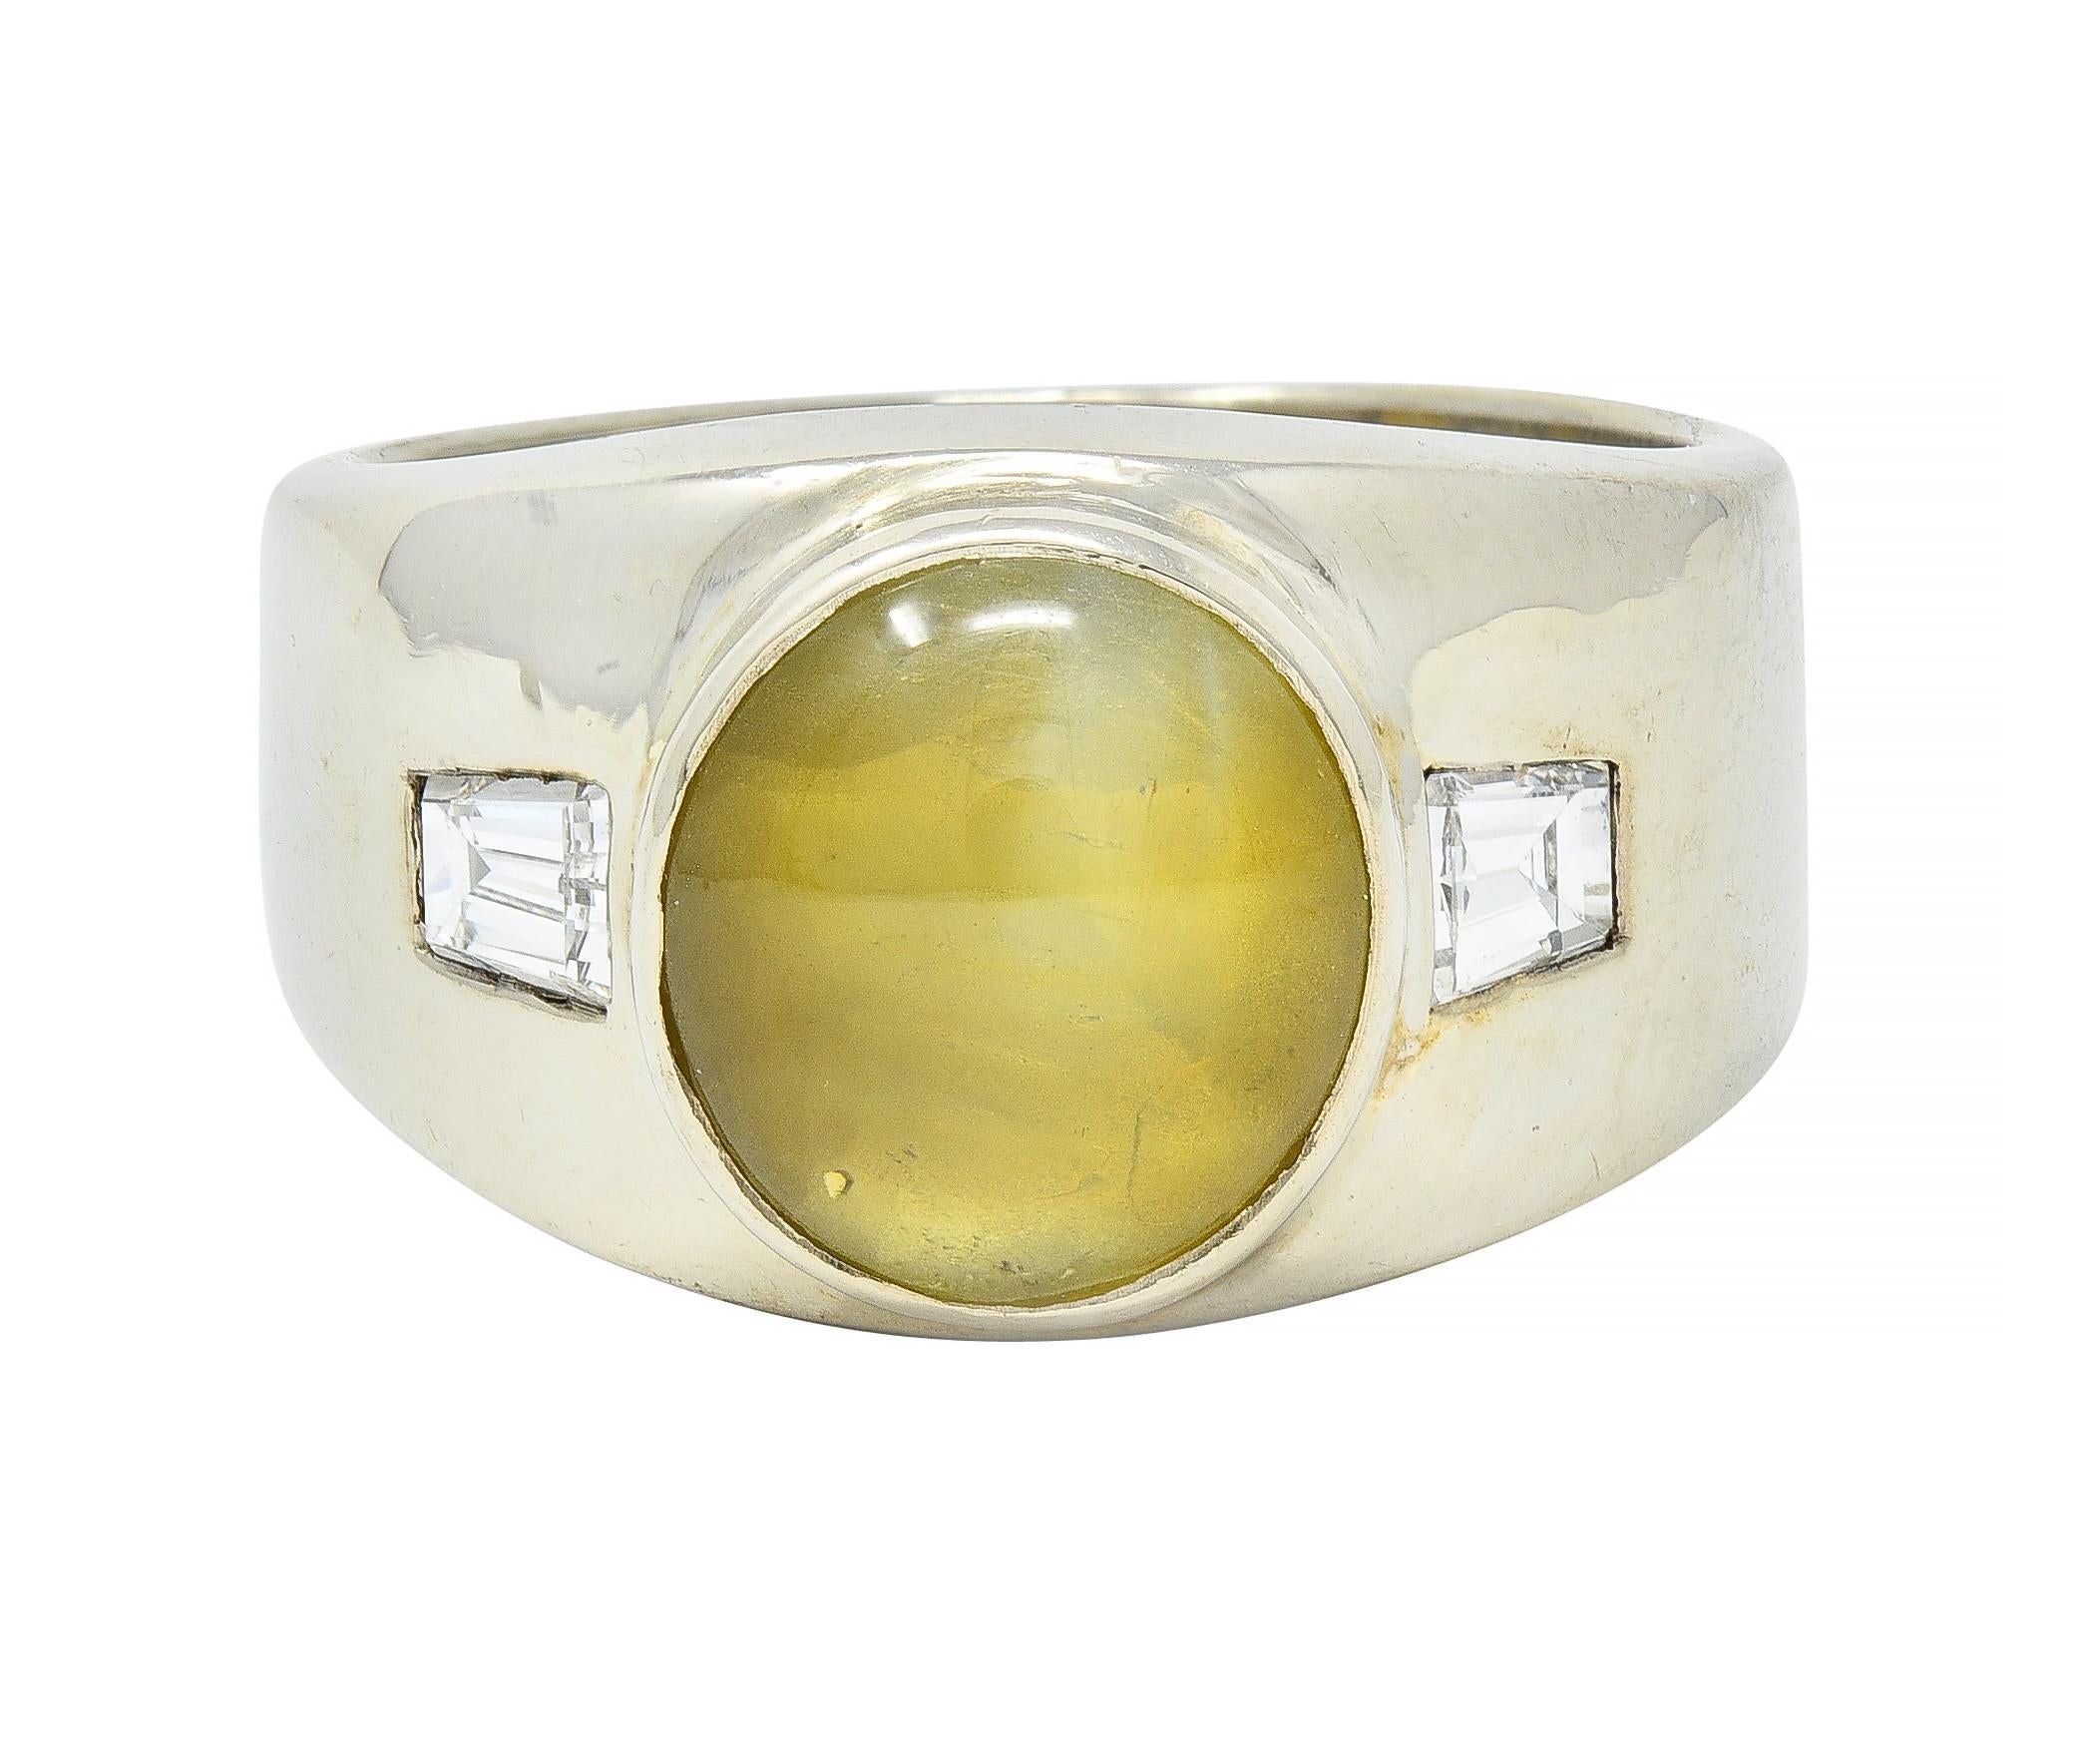 Centering an oval-shaped cat's eye chrysoberyl cabochon measuring 10.1 x 9.6 mm 
Yellowish green with linear chatoyancy and milk & honey effect - bezel set
Flanked by tapered baguette cut diamonds weighing approximately 0.36 carat total 
G color